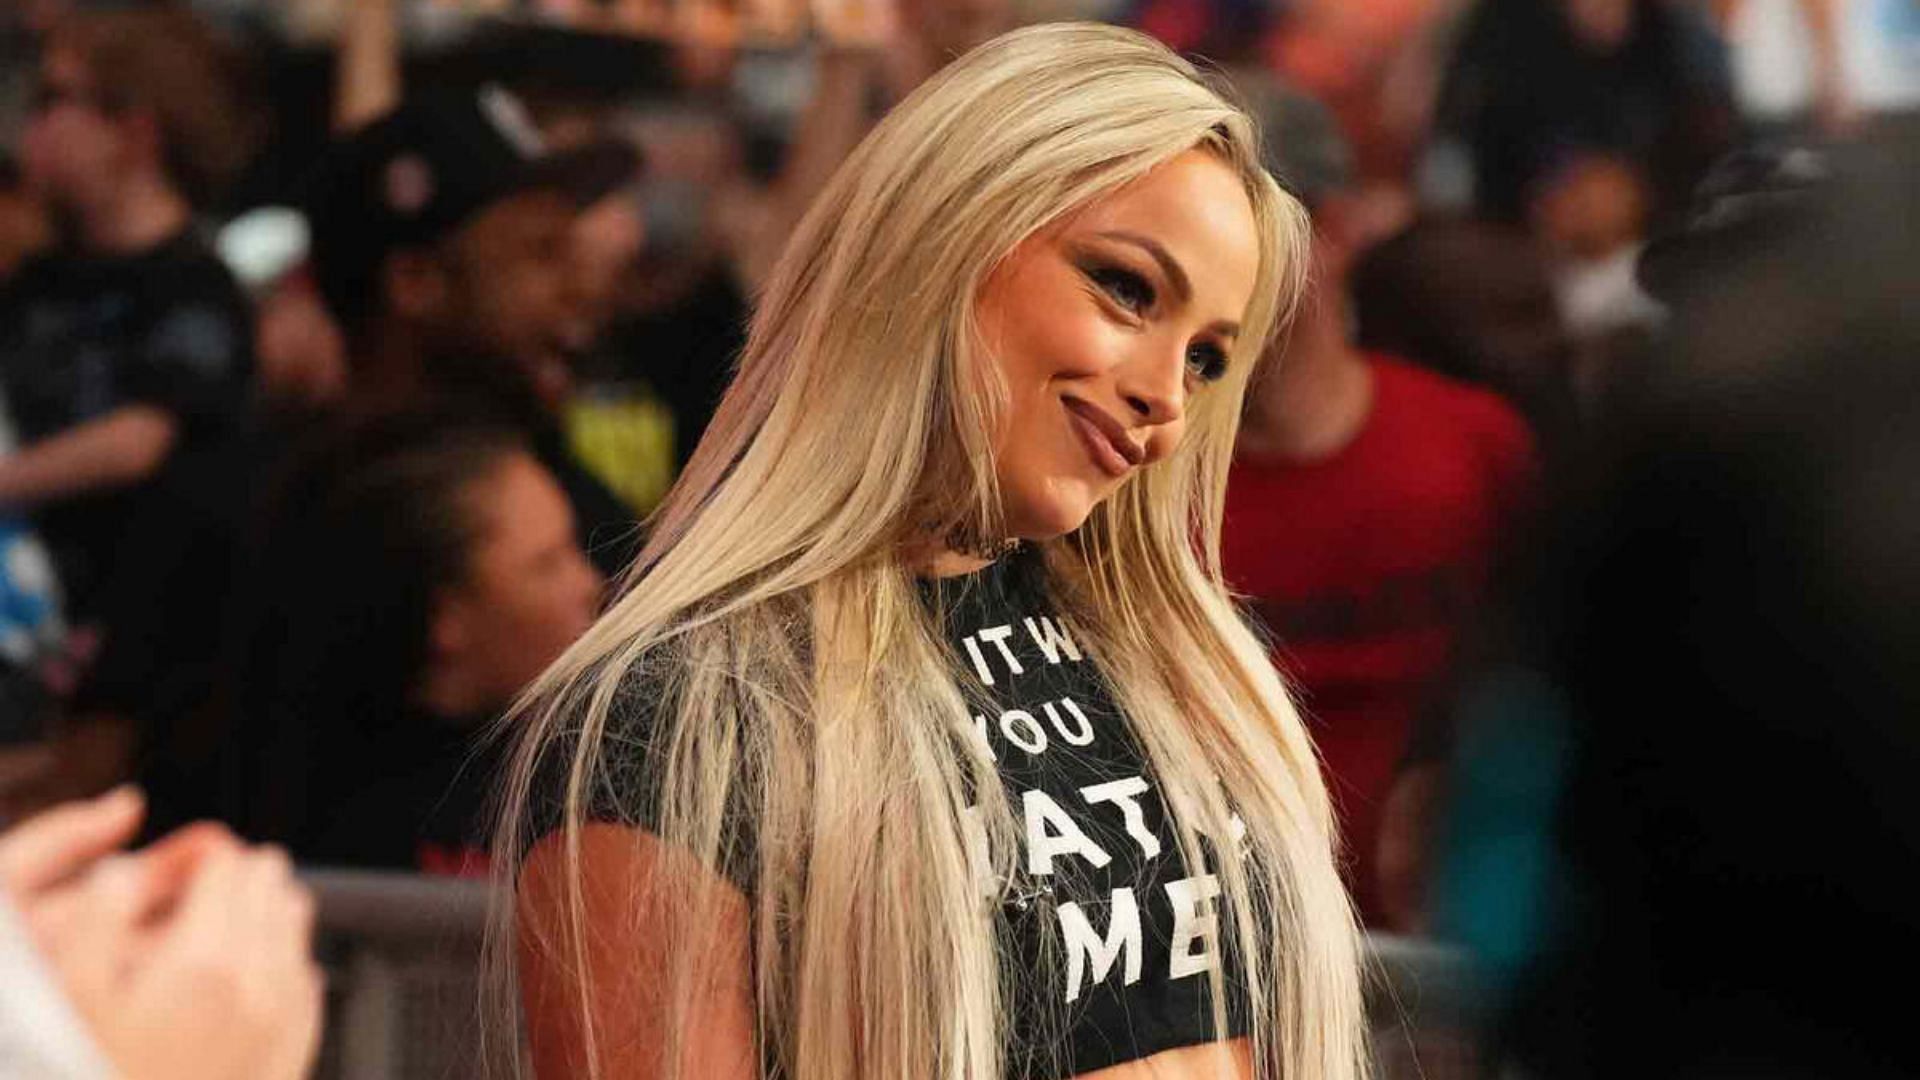 Liv Morgan is gaining notoriety on the WWE program (Image credit: WWE)